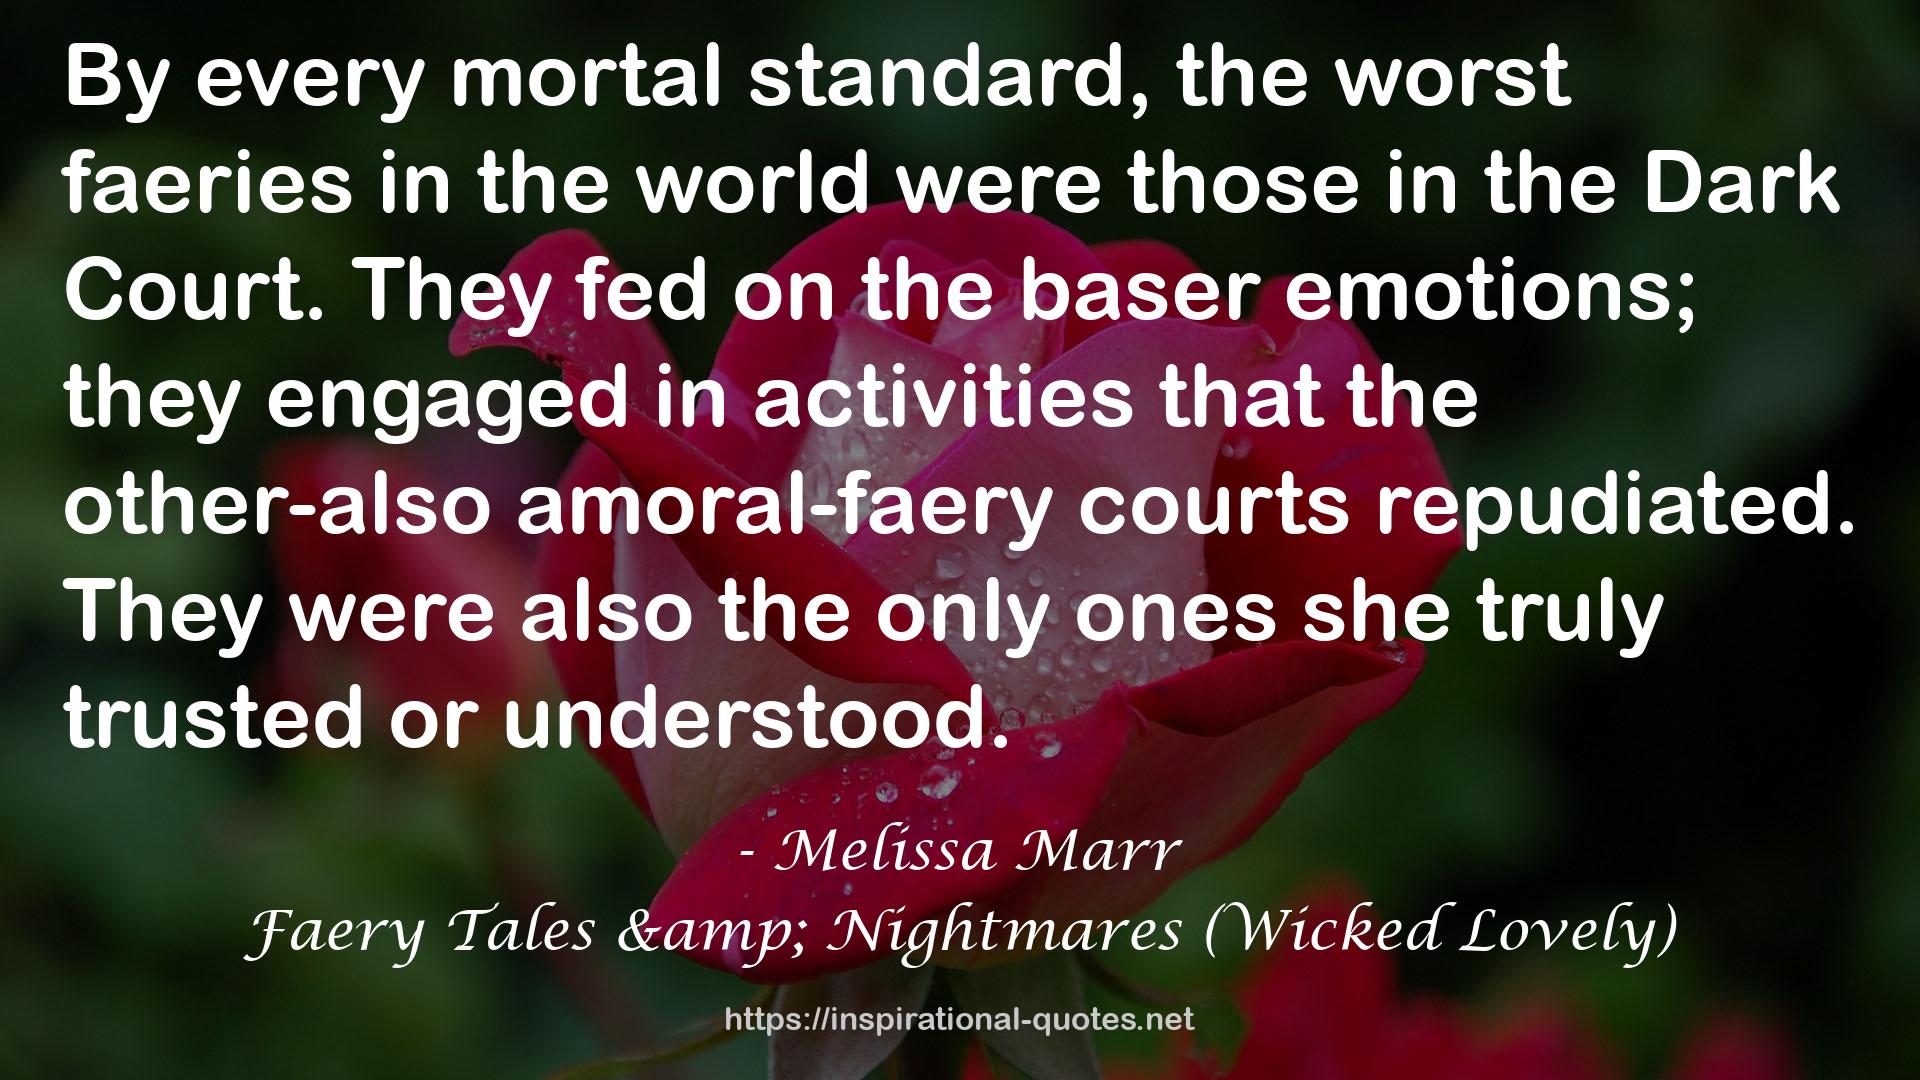 the other-also amoral-faery courts  QUOTES